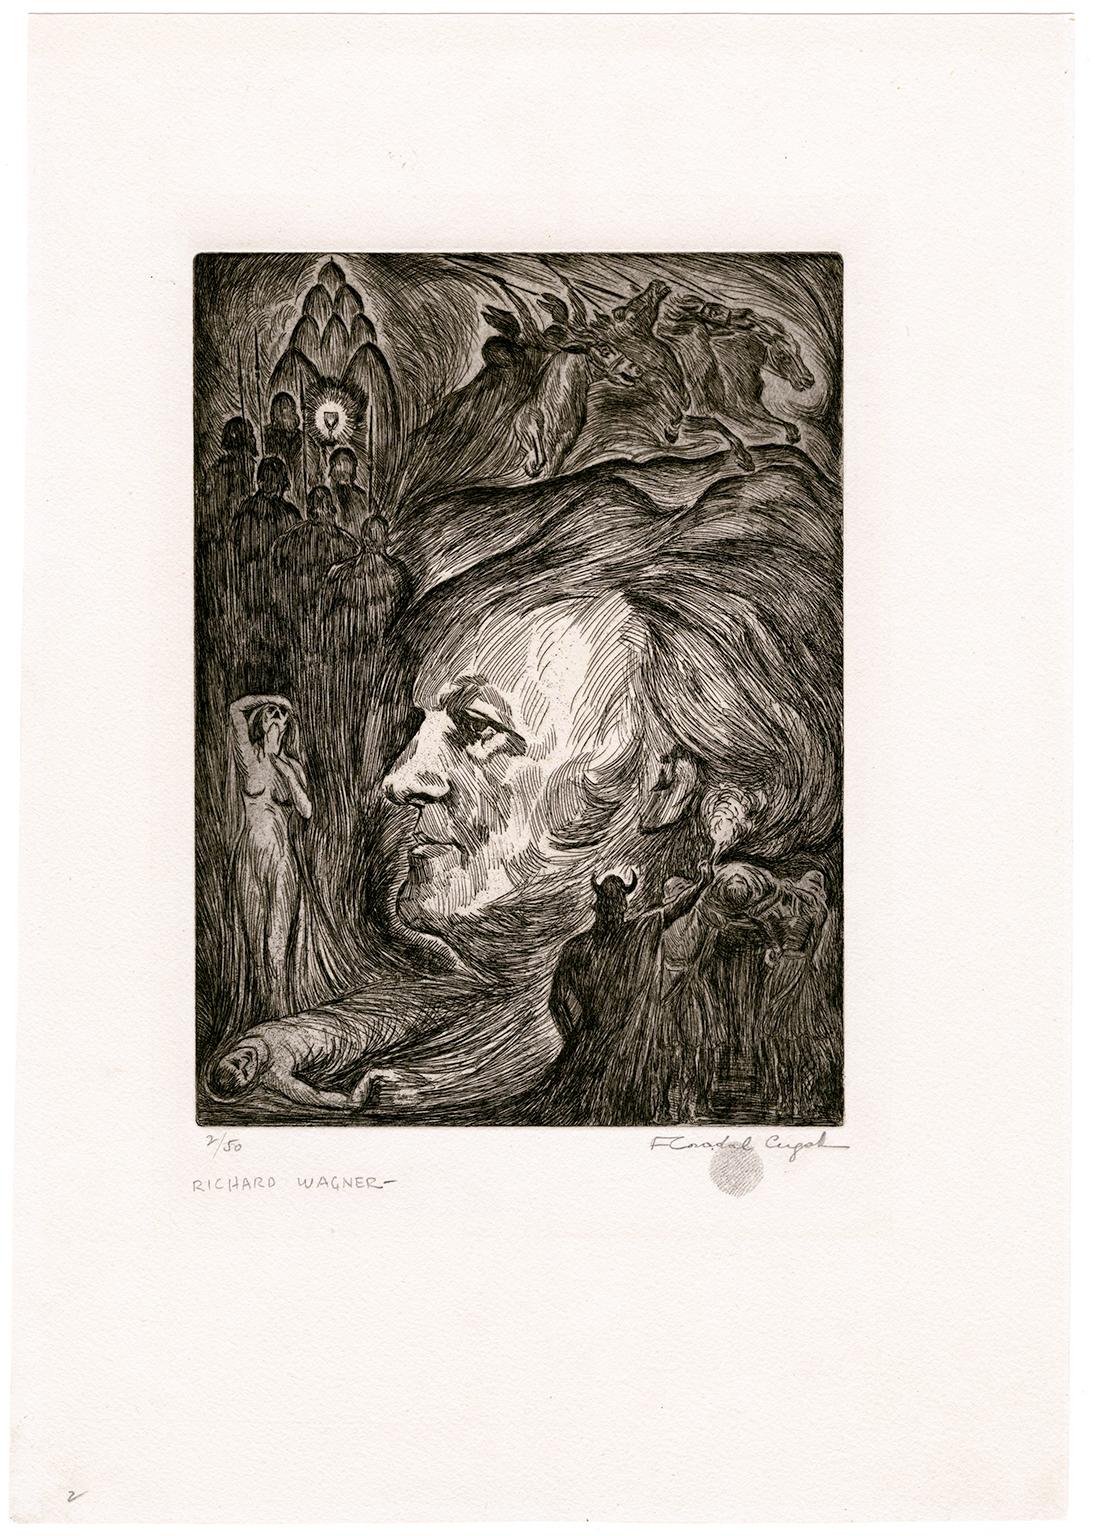 'Richard Wagner' — 1920s Portrait of the Composer - Print by Francis Coradal-Cugat